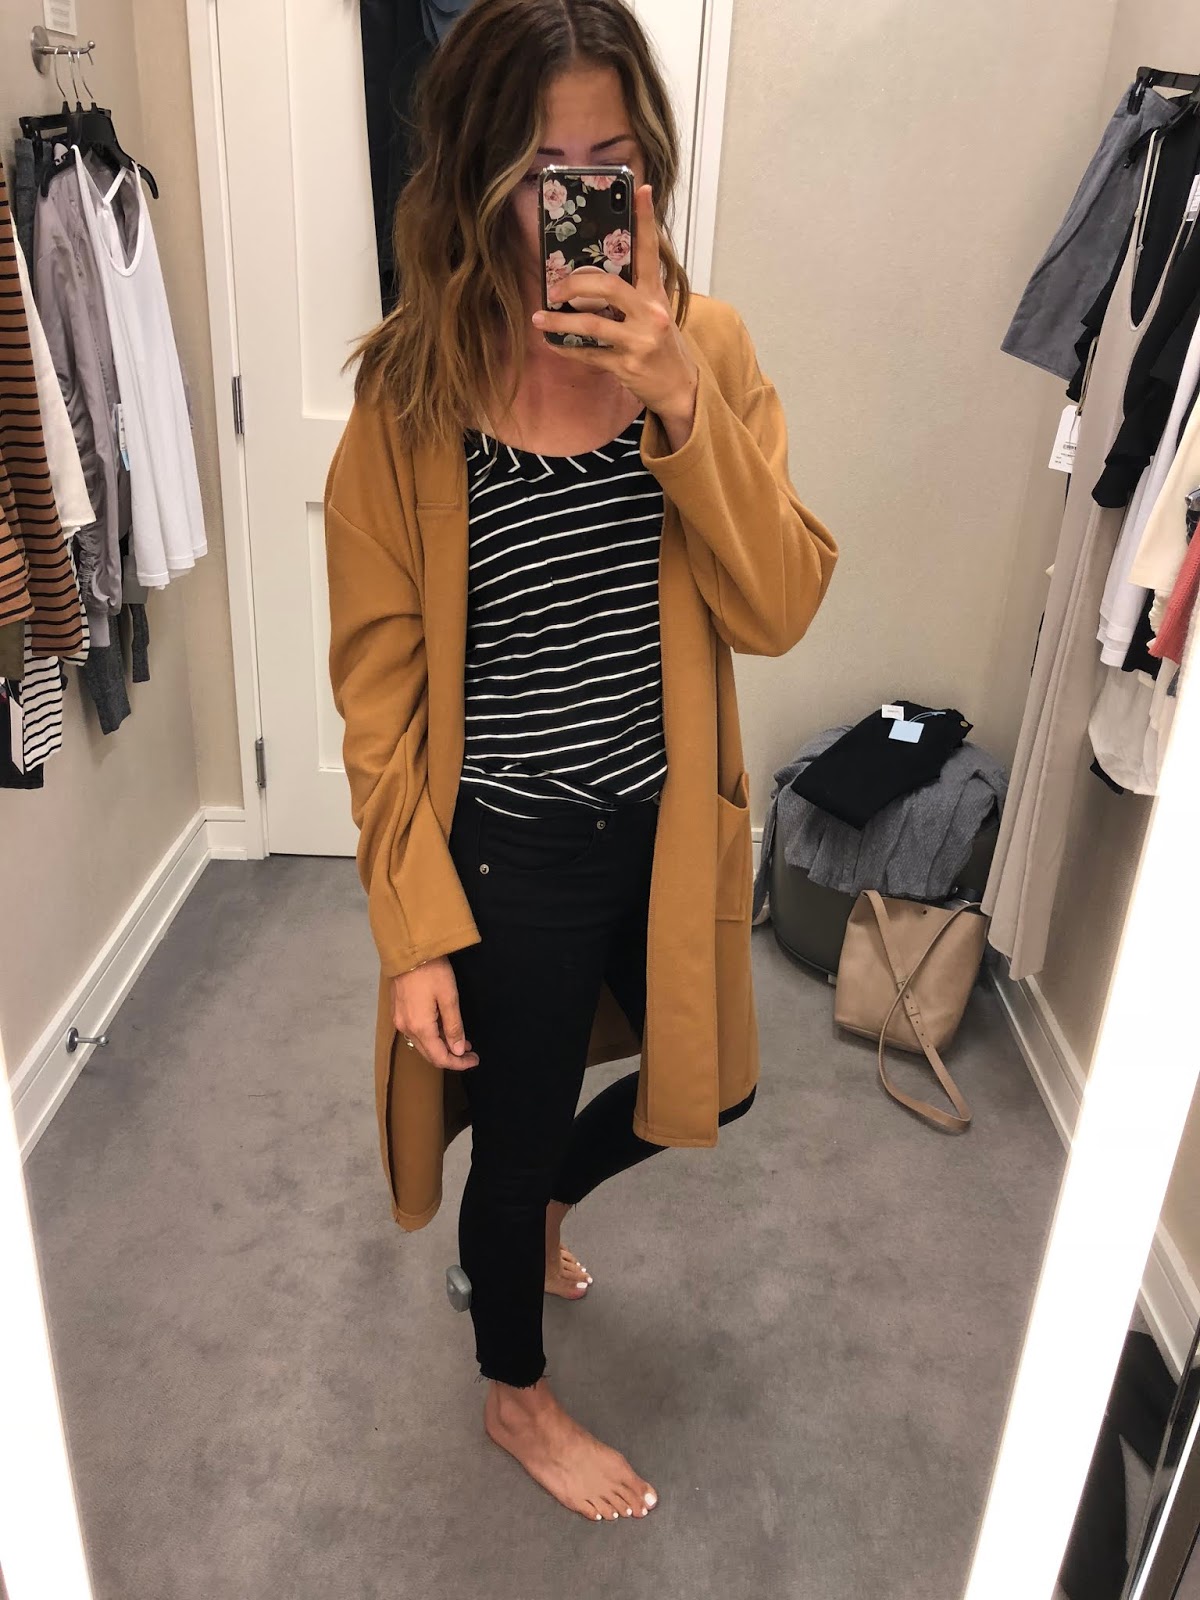 Nordstrom Anniversary Sale: What I Loved, Hated and Bought featured by popular Colorado fashion blogger, Leah Behr